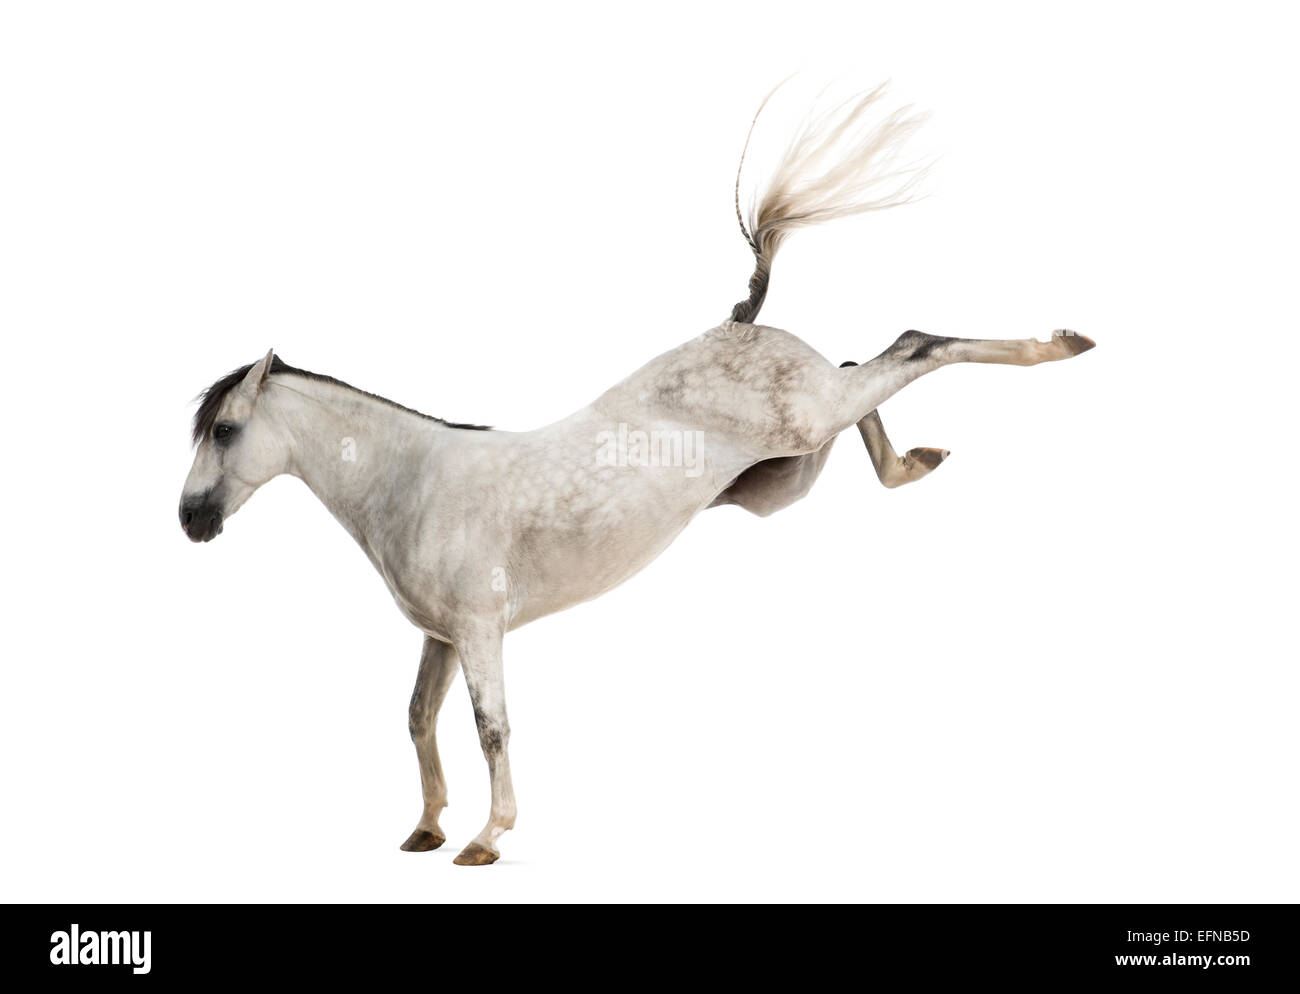 Andalusian horse kicking out Stock Photo